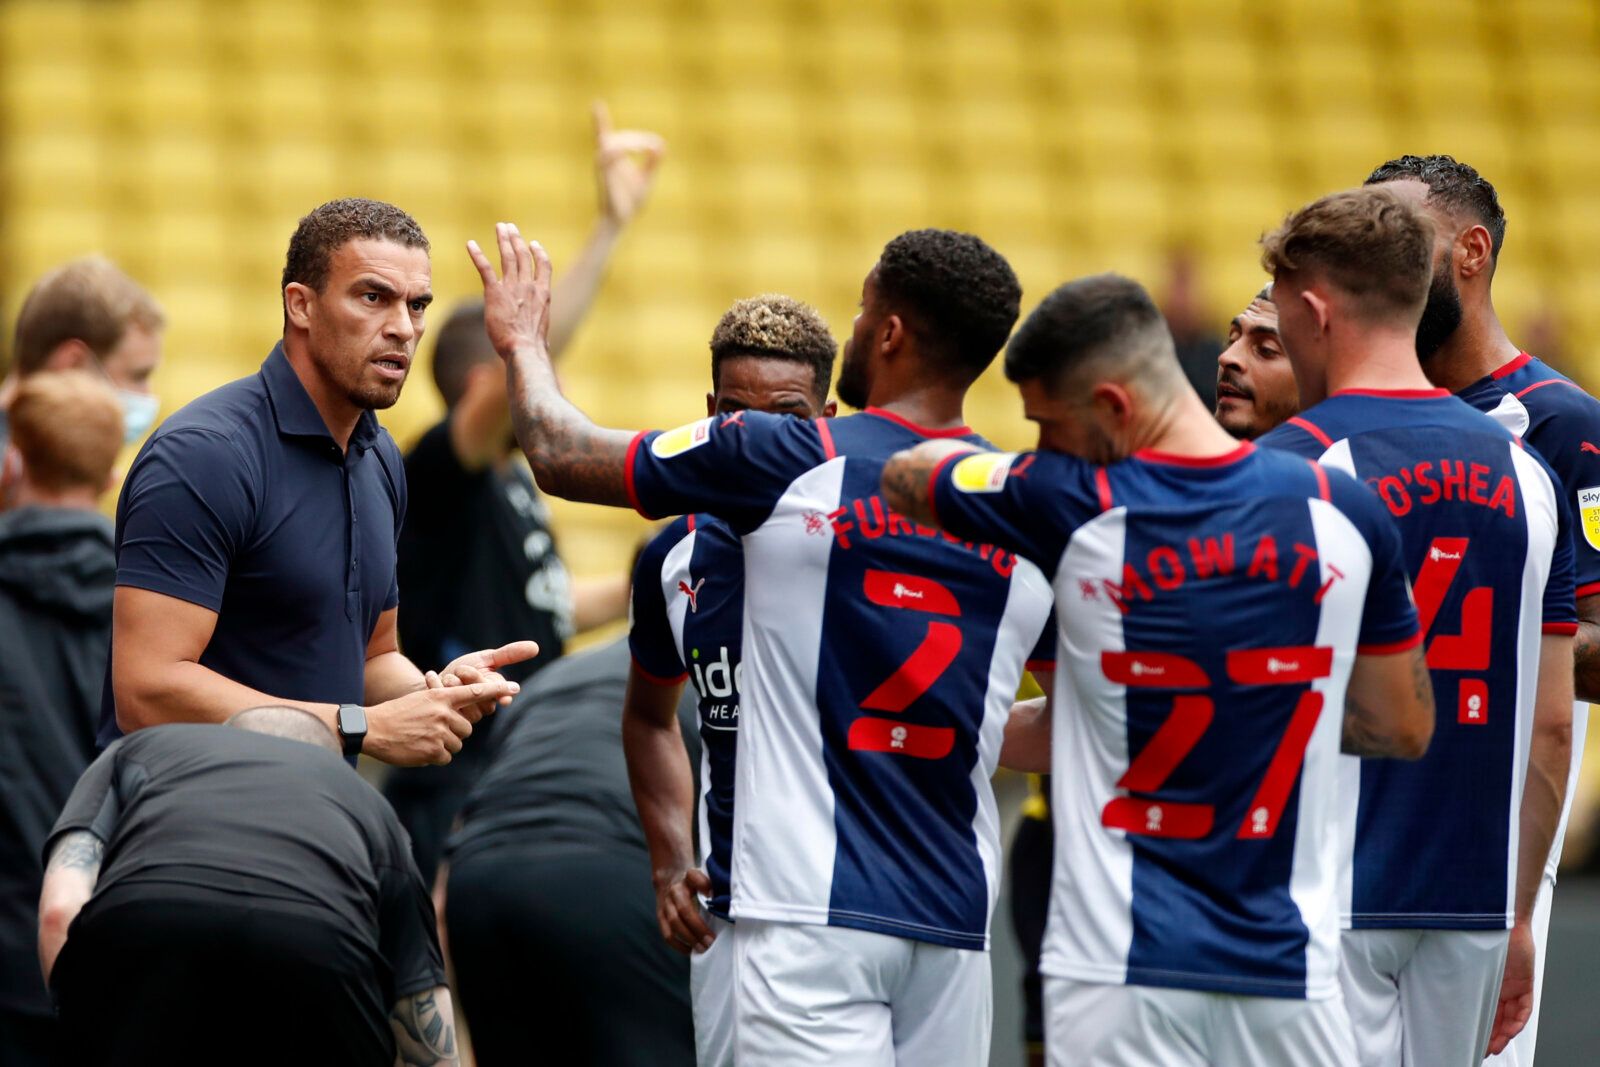 Soccer Football - Pre Season Friendly - Watford v West Bromwich Albion - Vicarage Road, Watford, Britain - July 24, 2021 West Bromwich Albion manager Valerien Ismael Action Images via Reuters/Paul Childs